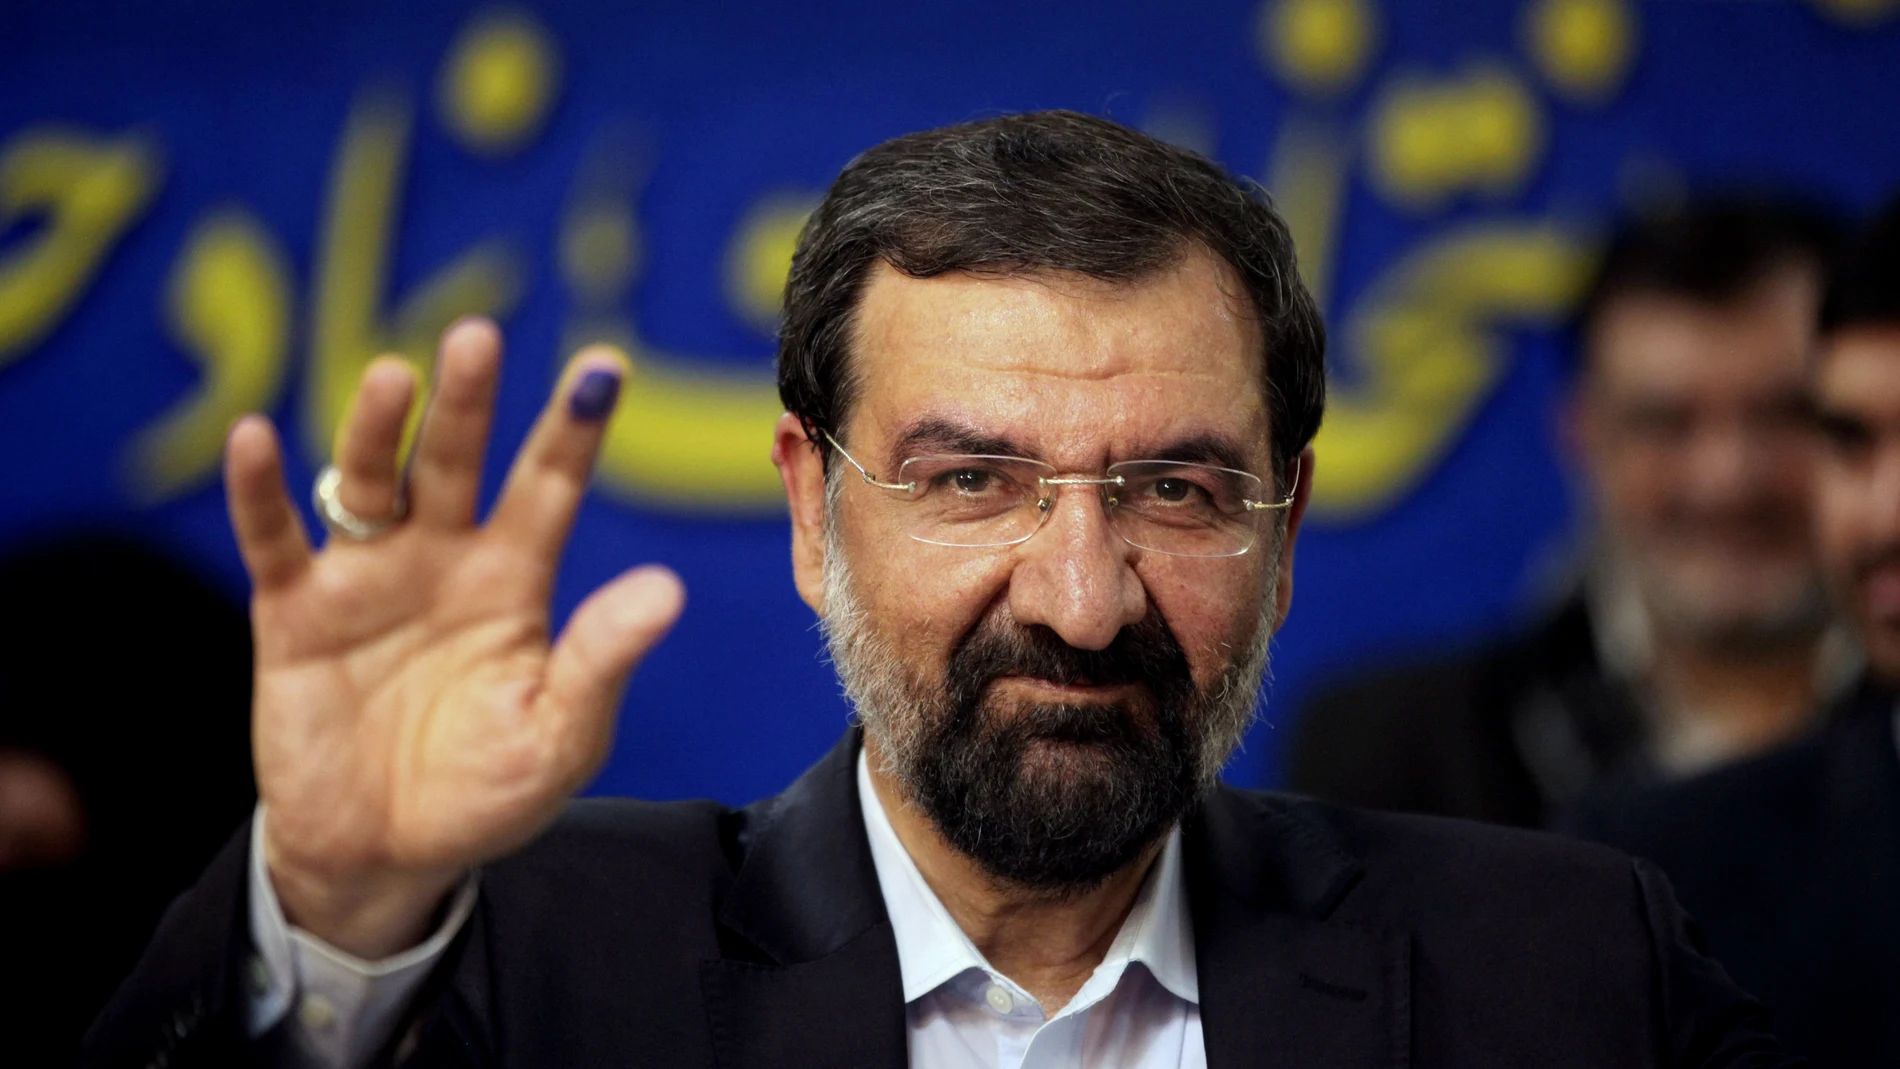 FILE - Mohsen Rezaei waves to reporters after registering as a presidential candidate, in Tehran, Iran, May 10, 2013. Argentinaâ€™s Foreign Ministry said Tuesday, Jan. 11, 2022, that the appearance of Rezaei, at the investiture of Nicaraguaâ€™s president on Monday was â€œan affront to Argentine justice and to the victims of the brutal terrorist attackâ€³. Rezaei, a former leader of Iranâ€™s paramilitary Revolutionary Guard, is wanted by Argentina on an Interpol â€œRed Noticeâ€ alleging he was involved in the 1994 bombing of a Jewish center in Buenos Aires that killed 85 people. (AP Photo/Vahid Salemi, File)